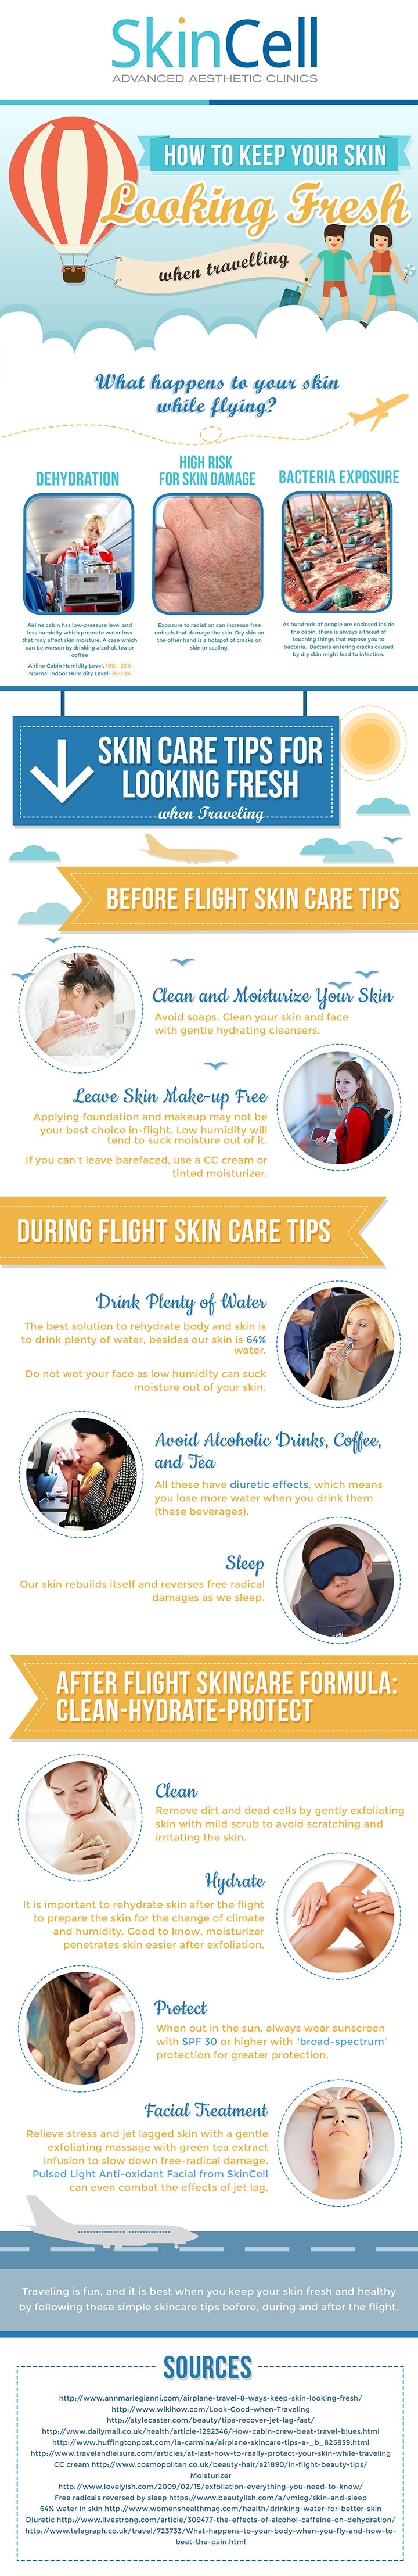 How to Keep Skin Looking Fresh When Traveling